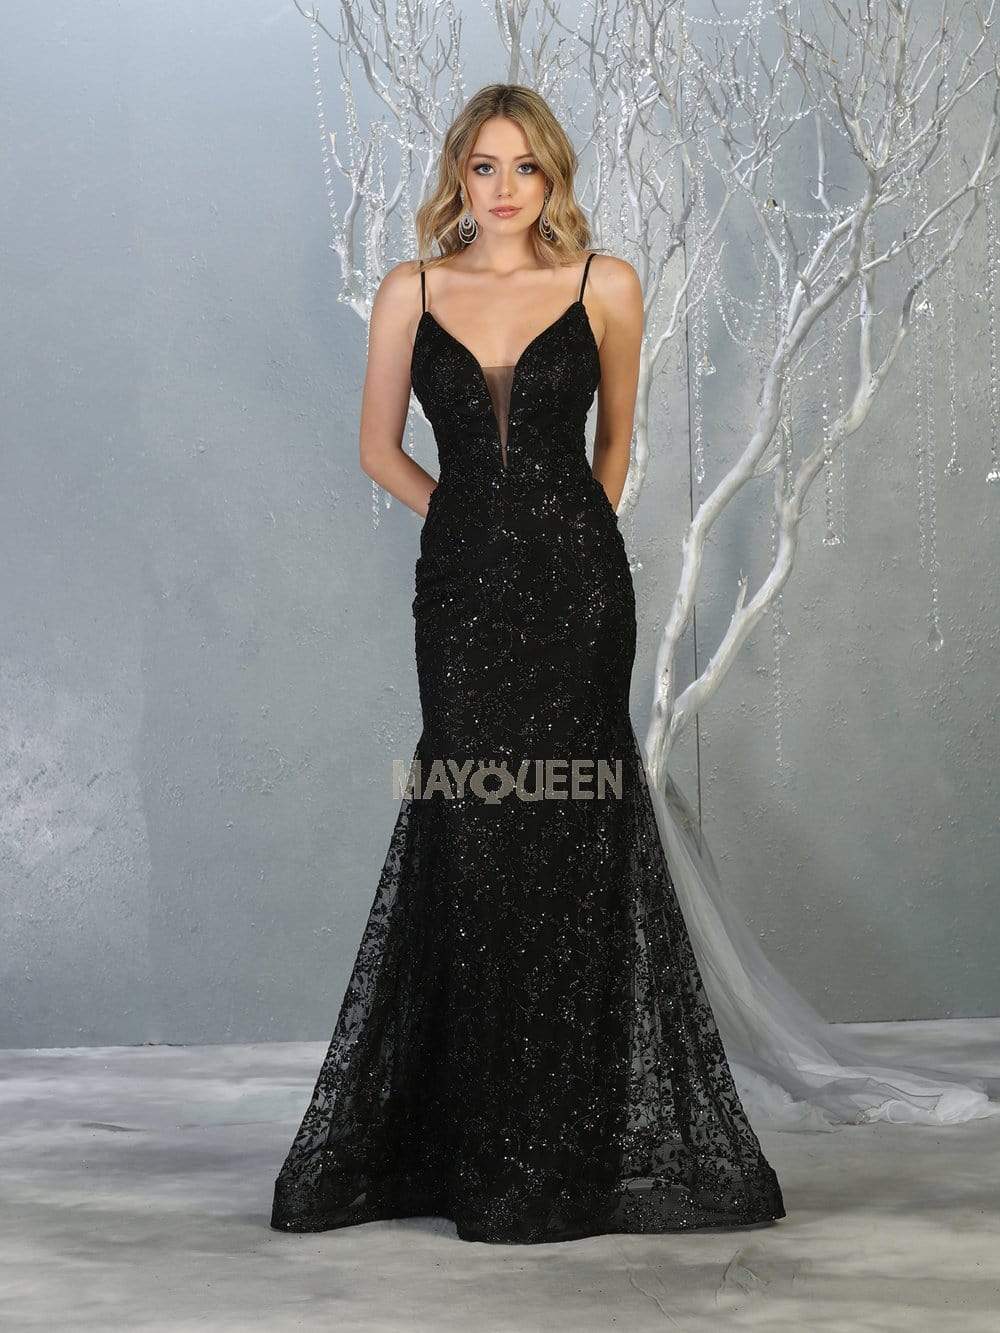 May Queen - MQ1752 Bead Embellished Plunging V-Neck Dress Prom Dresses 4 / Black